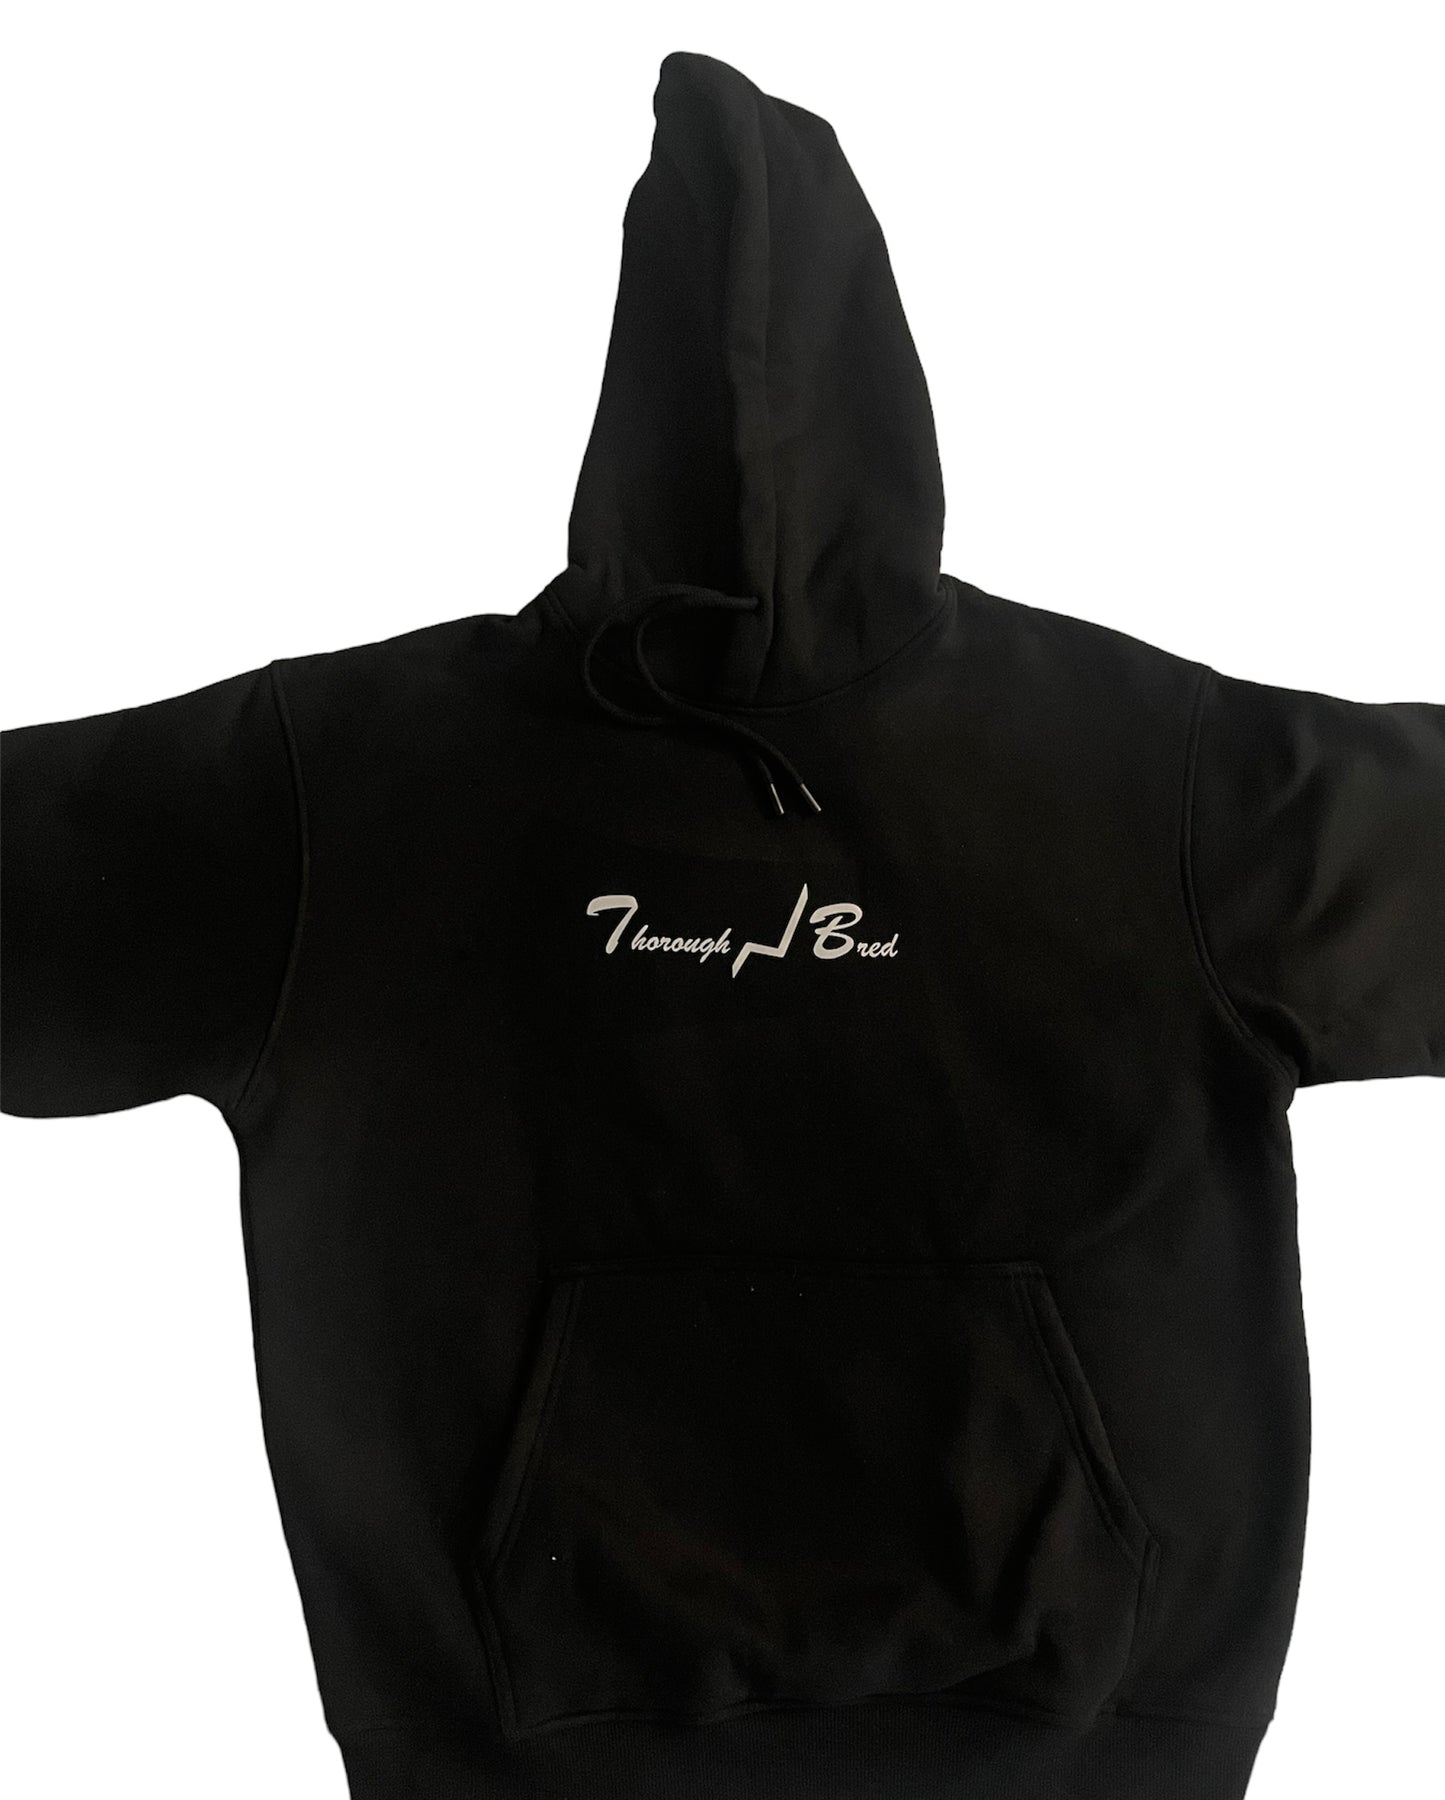 New TB Reflective Hoodie (Top Only)